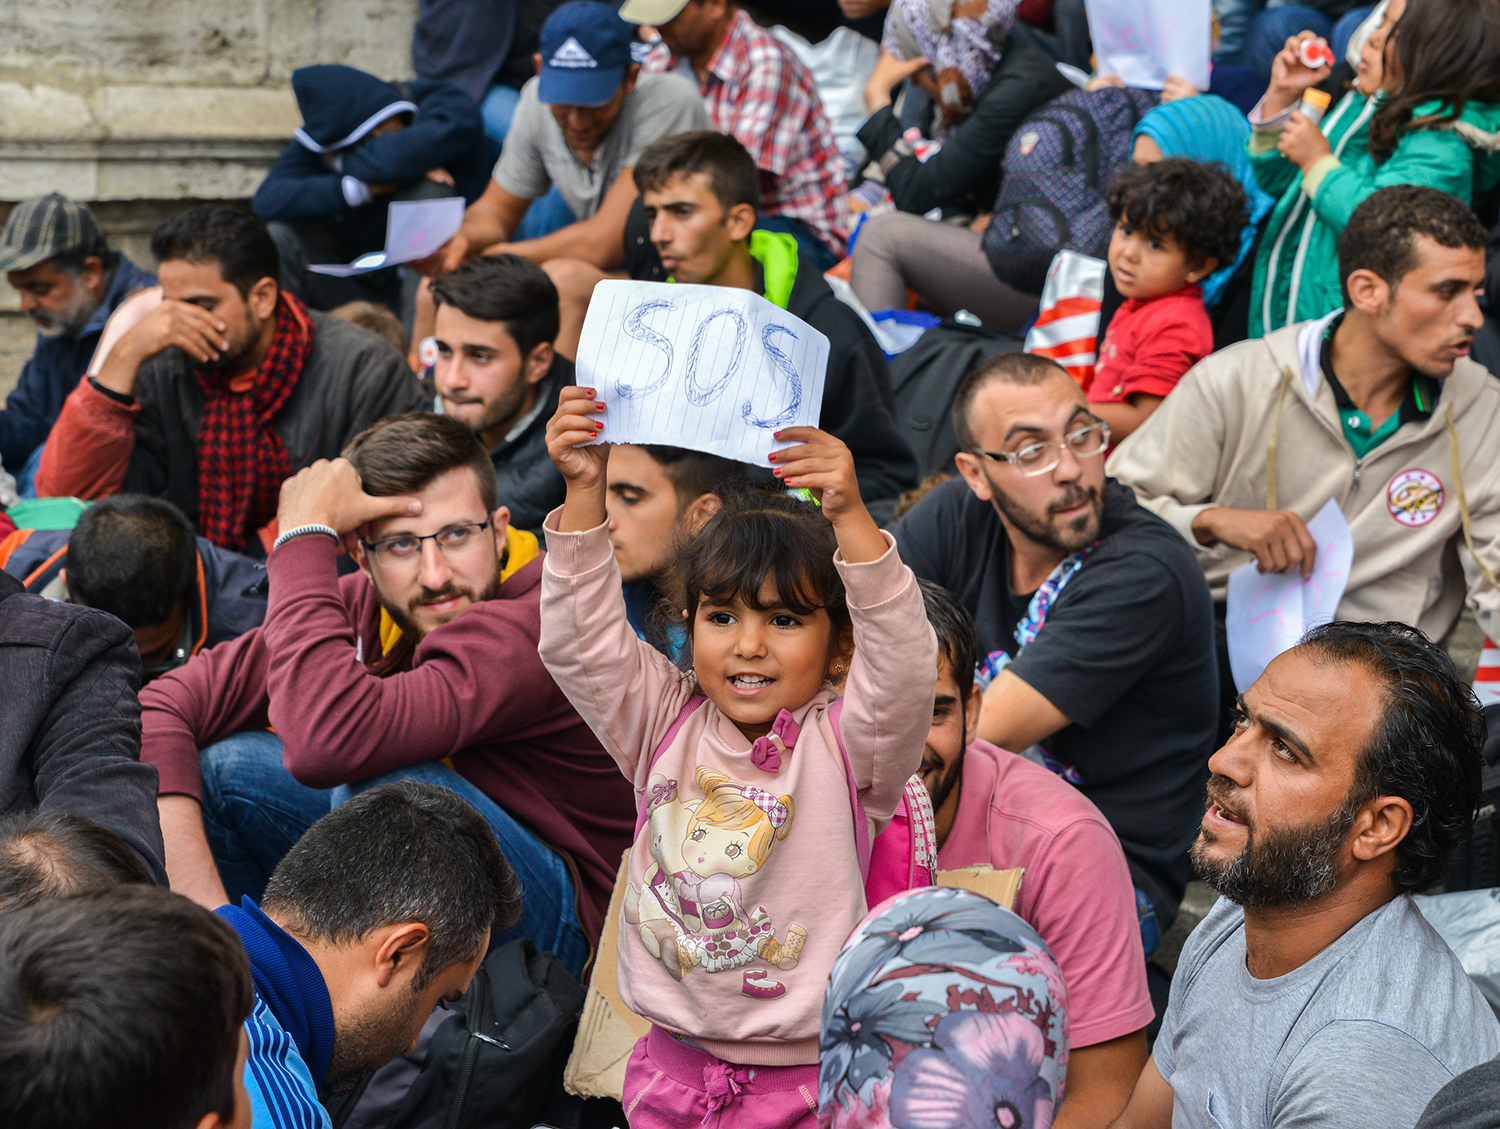 A young refugee girl holds up a SOS sign at Keleti Rail Station, Budapest, Hungary. 